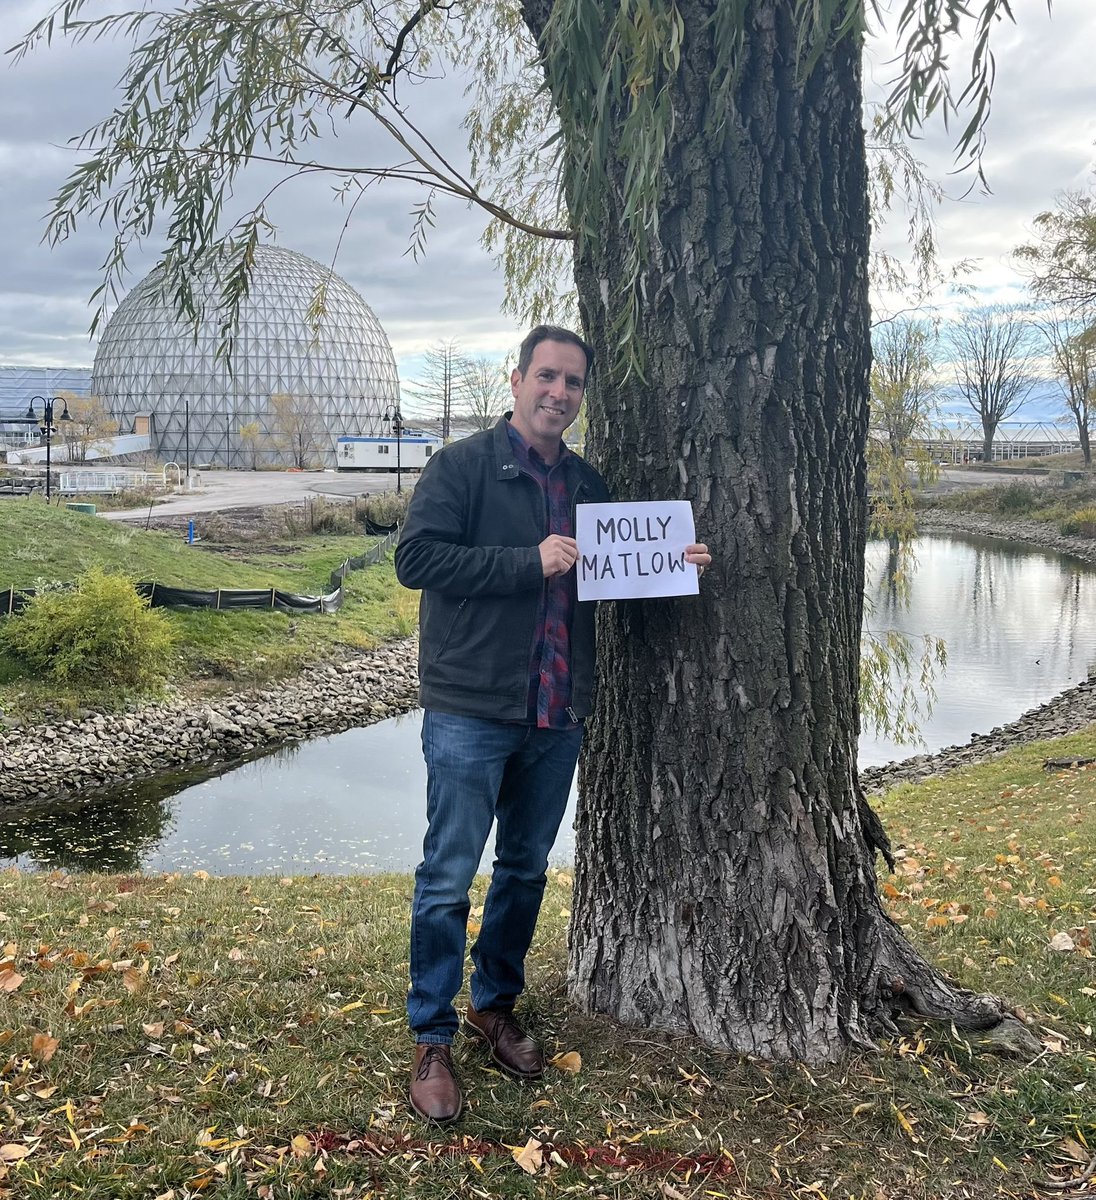 Together, let’s protect our waterfront & trees at Ontario Place. I was asked to dedicate a tree. I chose to do it for my daughter Molly, so that she and every child might enjoy an Ontario Place that’s fun, natural and green, for generations to come. Visit: savethetreesatop.com/index.html